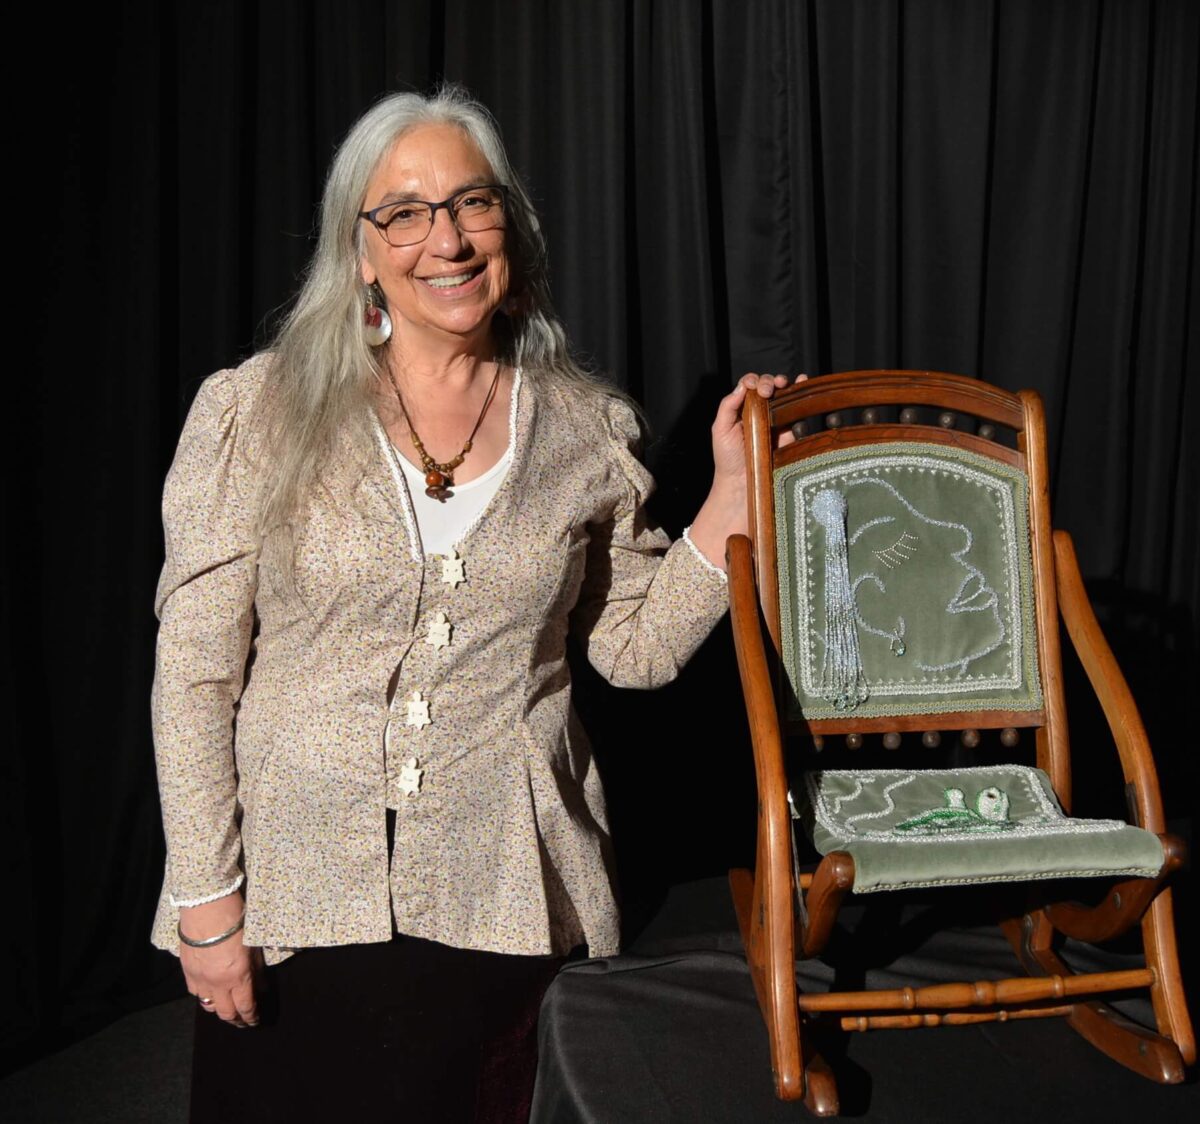 Artist Karen Ann Hoffman standing next to a chair she embroidered with beads